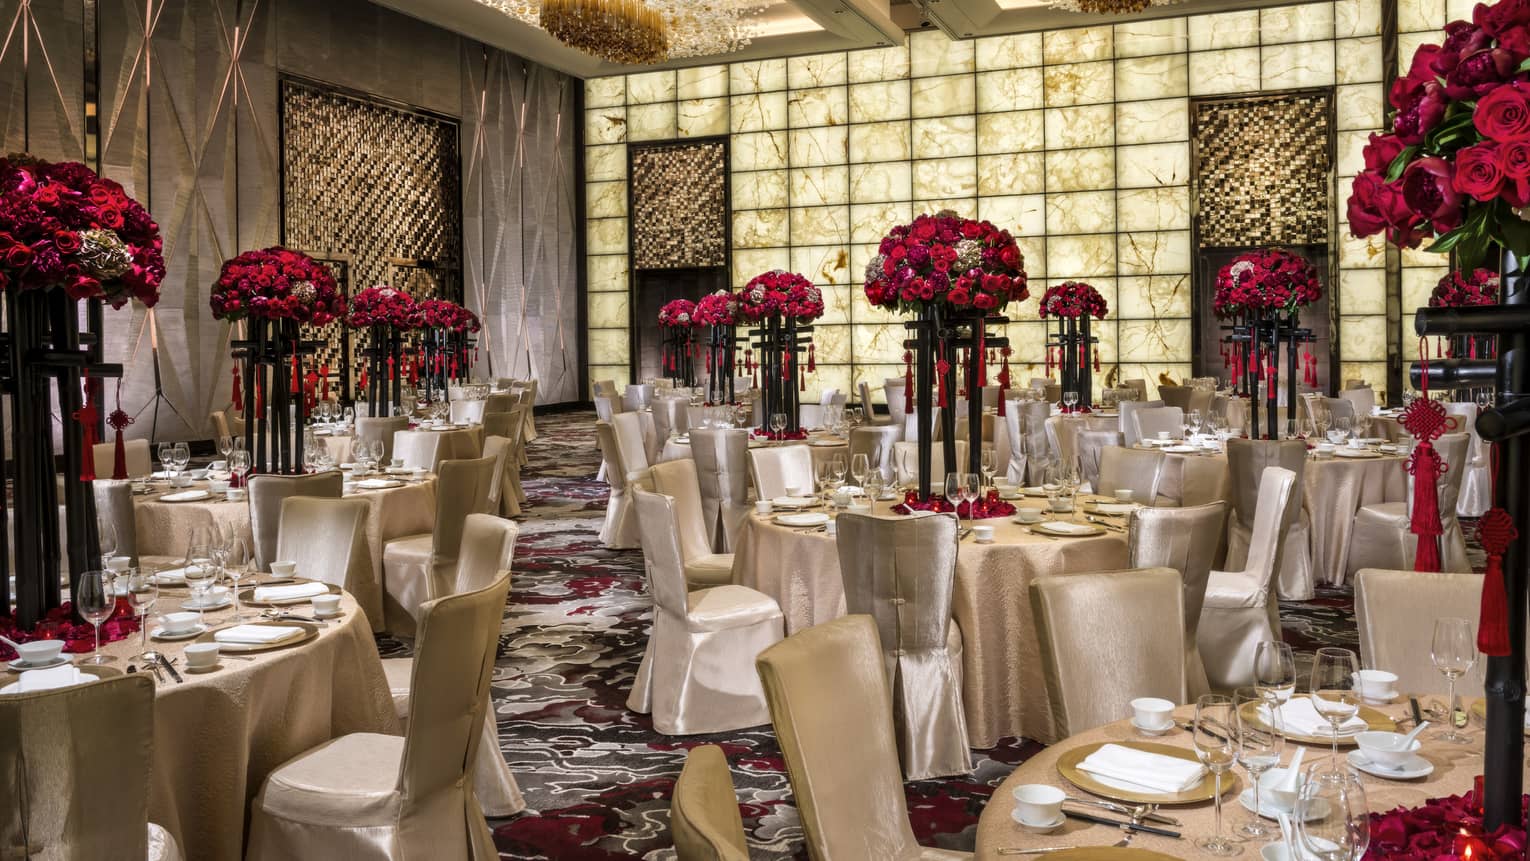 Grand Ballroom banquet tables and chairs with silk linens, red flowers in tall vases 